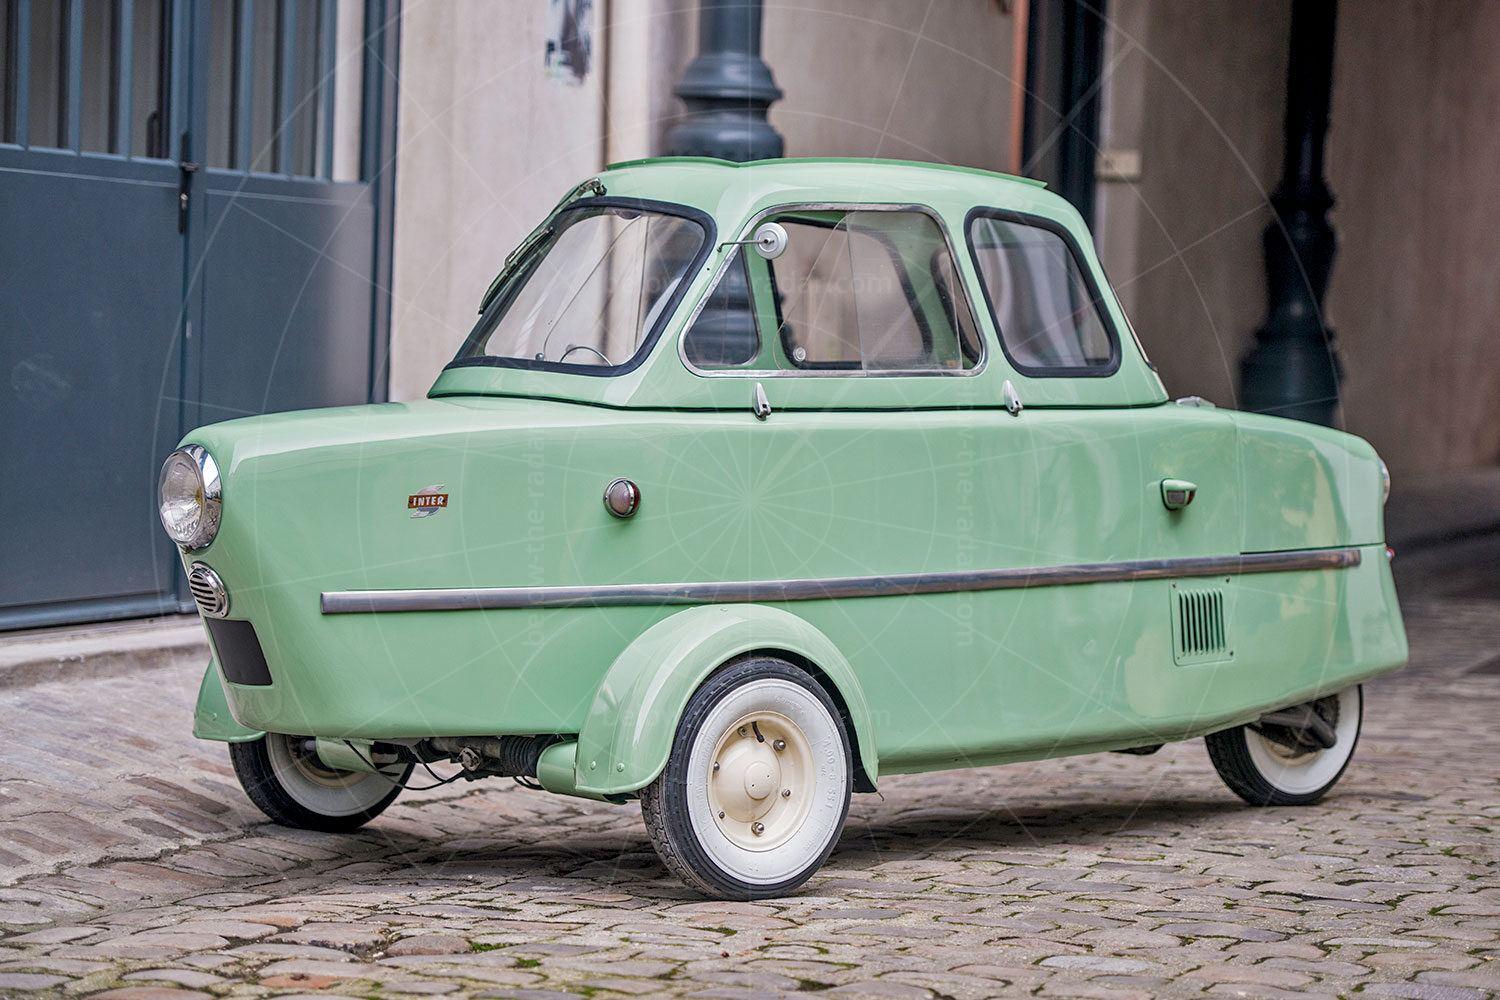 SNCAN Inter 175A Autoscooter Berline Pic: RM Sotheby's | SNCAN Inter 175A Autoscooter Berline